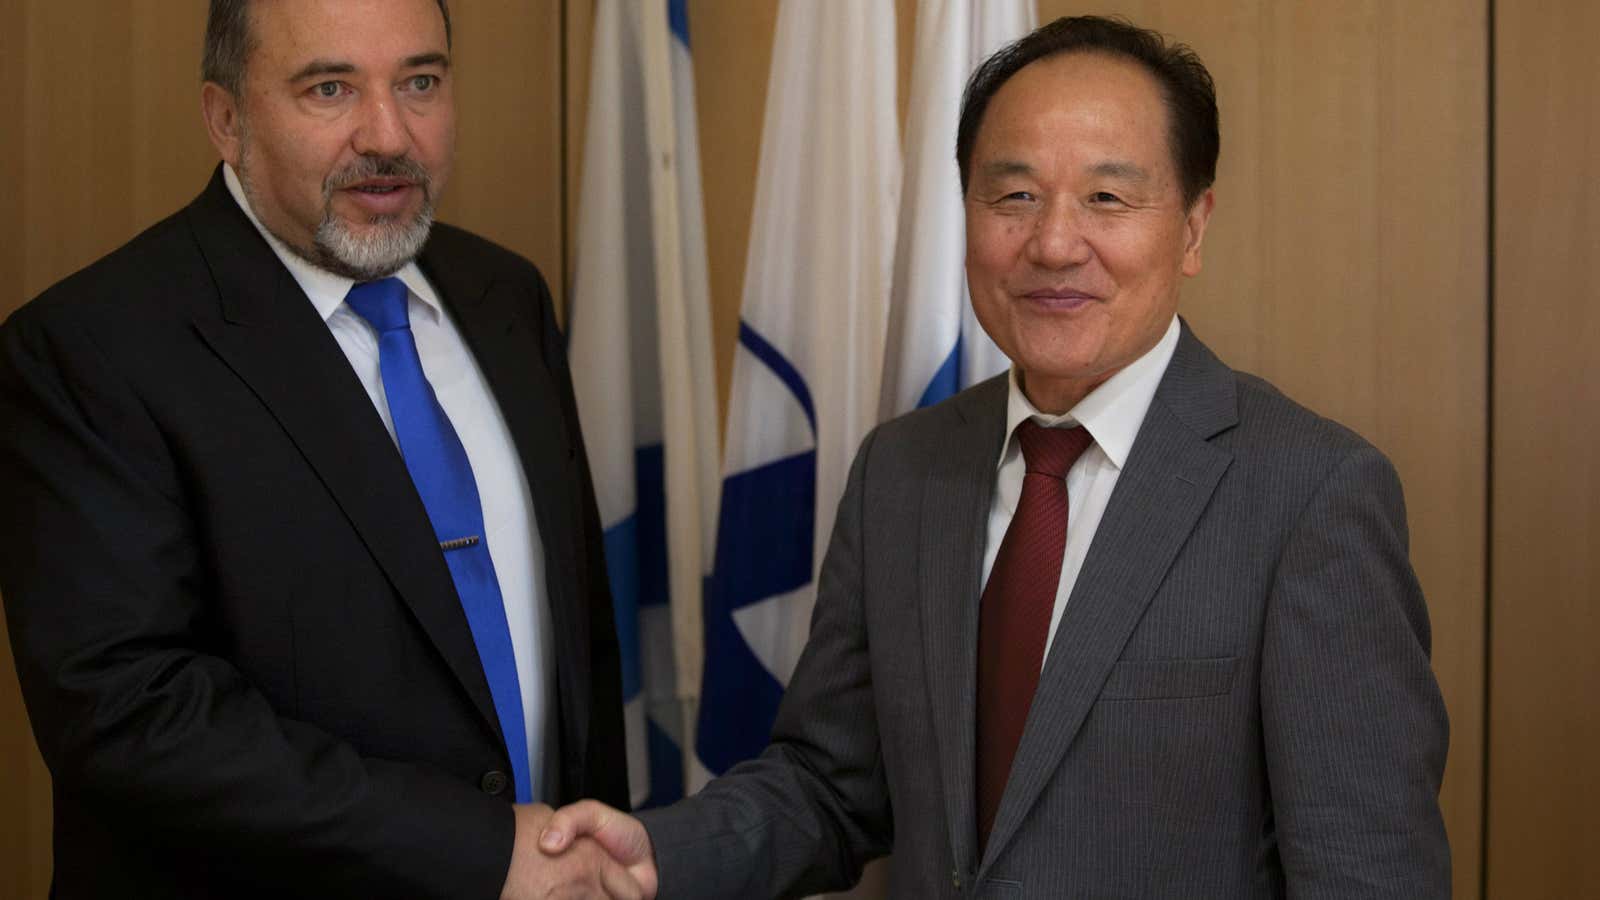 Wu Sike, right, shakes hands with Israeli Foreign Minister Avigdor Lieberman